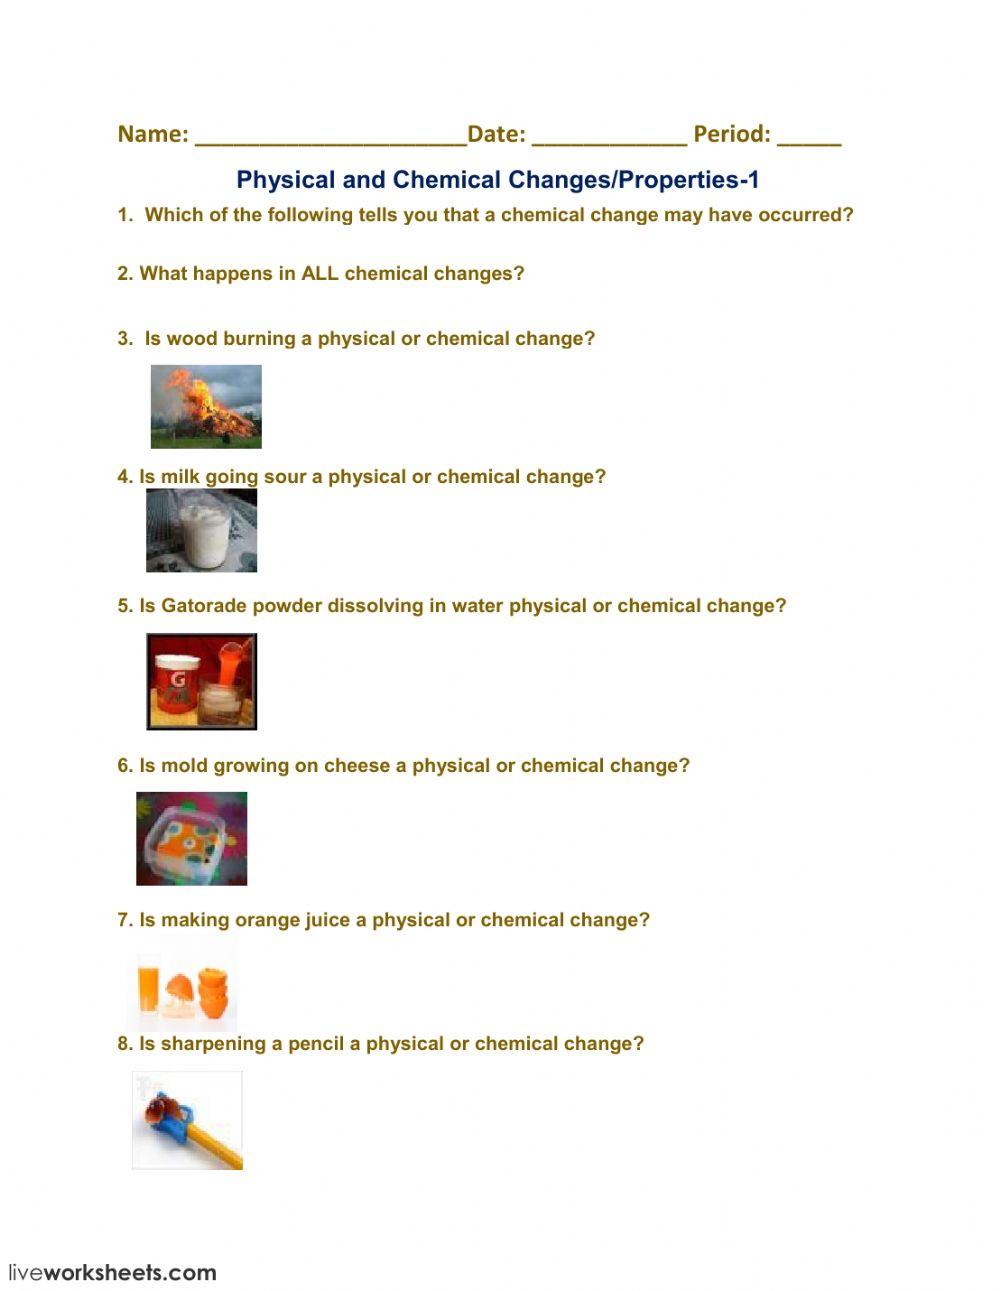 Chemical and Physical Change Worksheet Physical and Chemical Changes Properties 1 Interactive